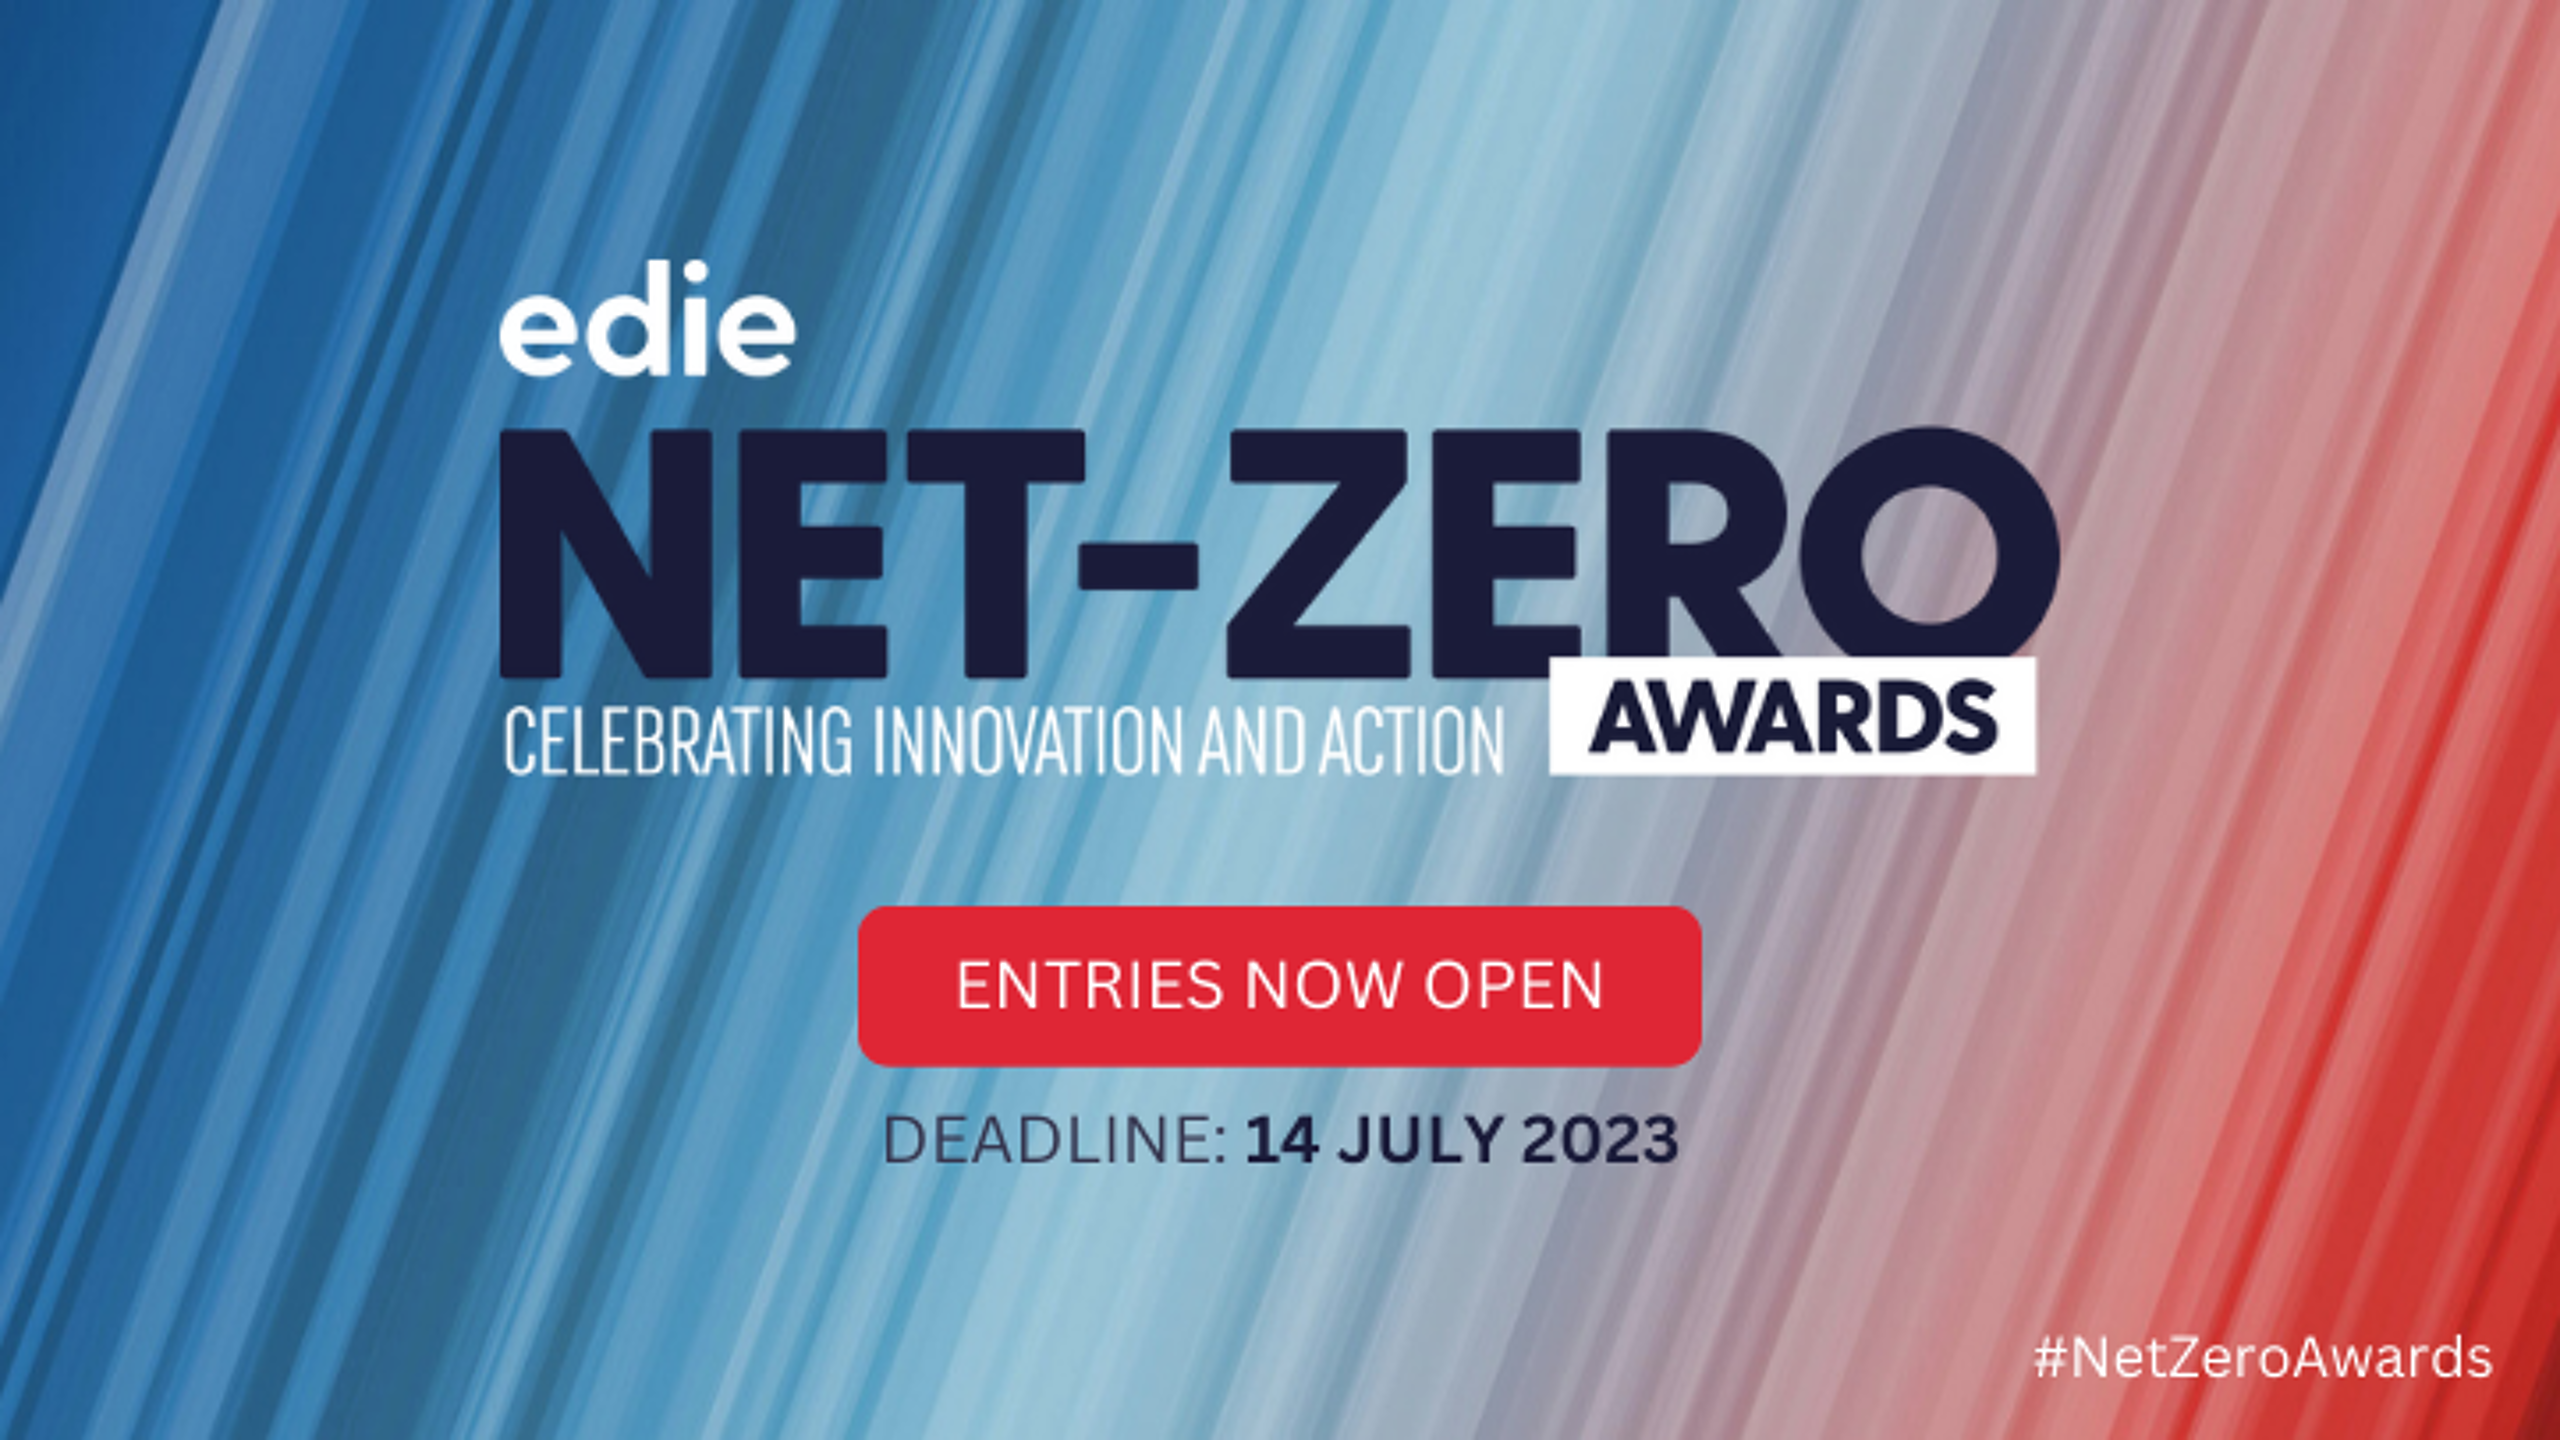 edie launches the brand-new Net-Zero Awards with entries now open